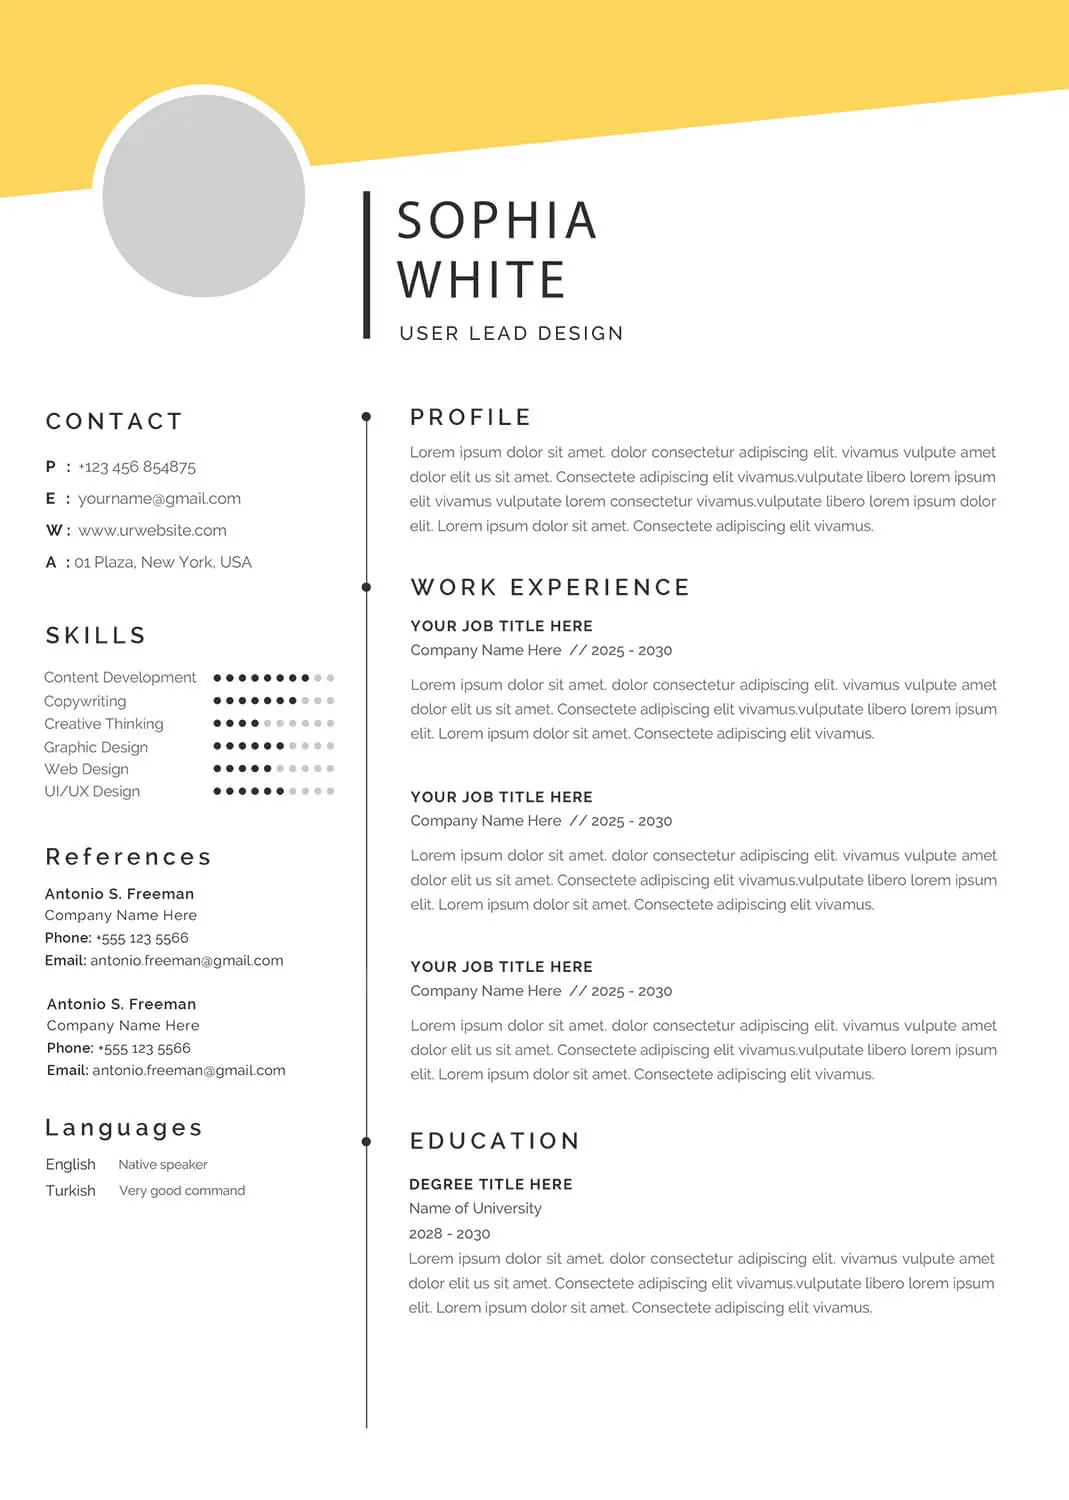 Marriage and Family Therapist Resume Templates